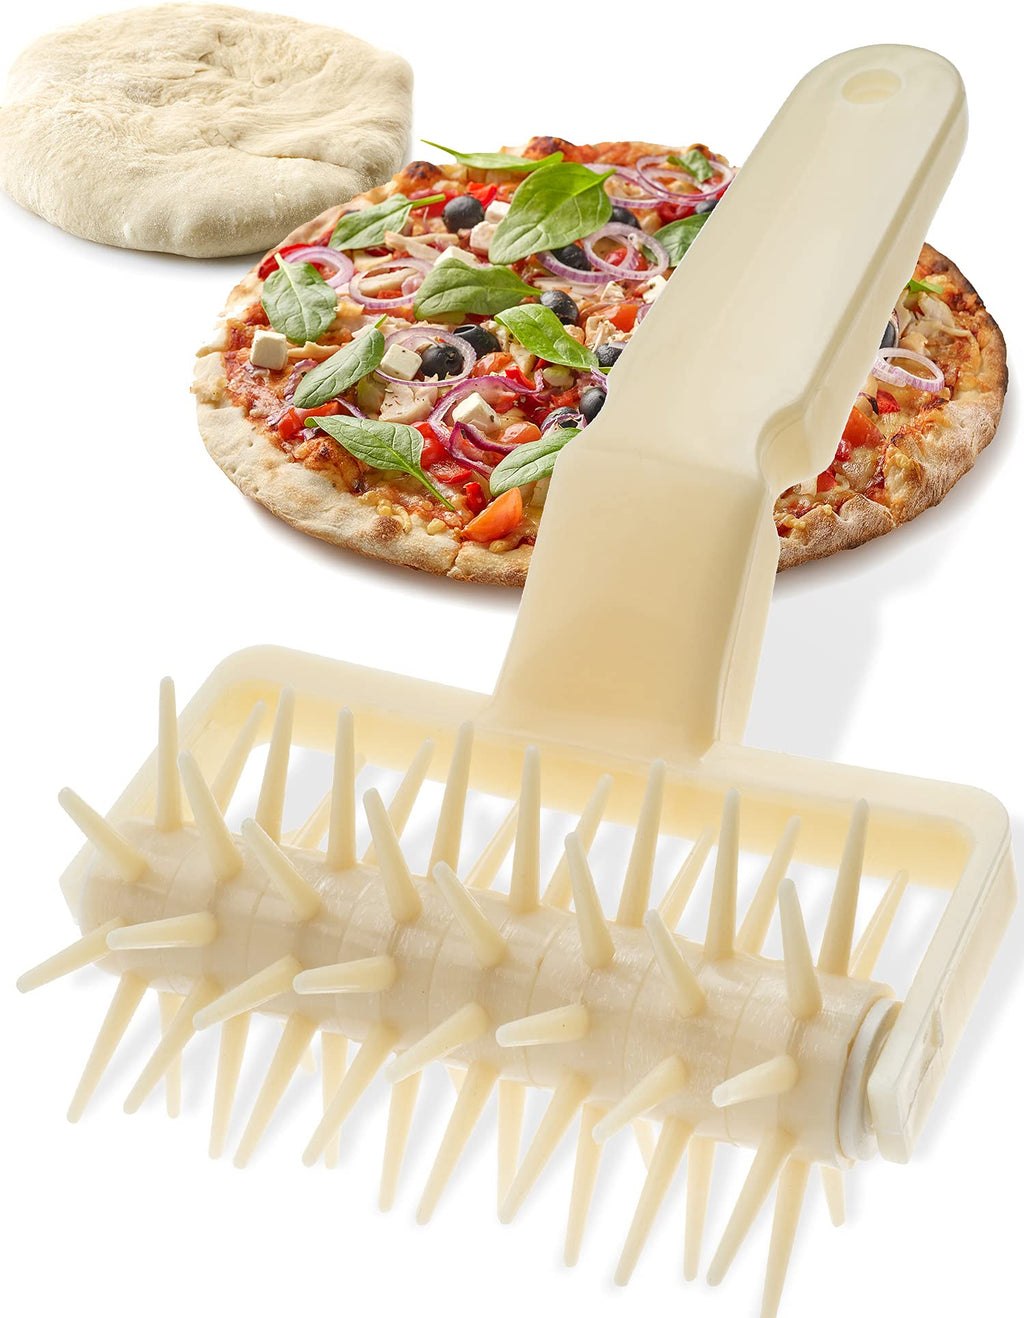 Orblue Dough Docker, Helps Cook Thin Crust Pizza Uniformly & Prevents Dough From Blistering (1-Pack)